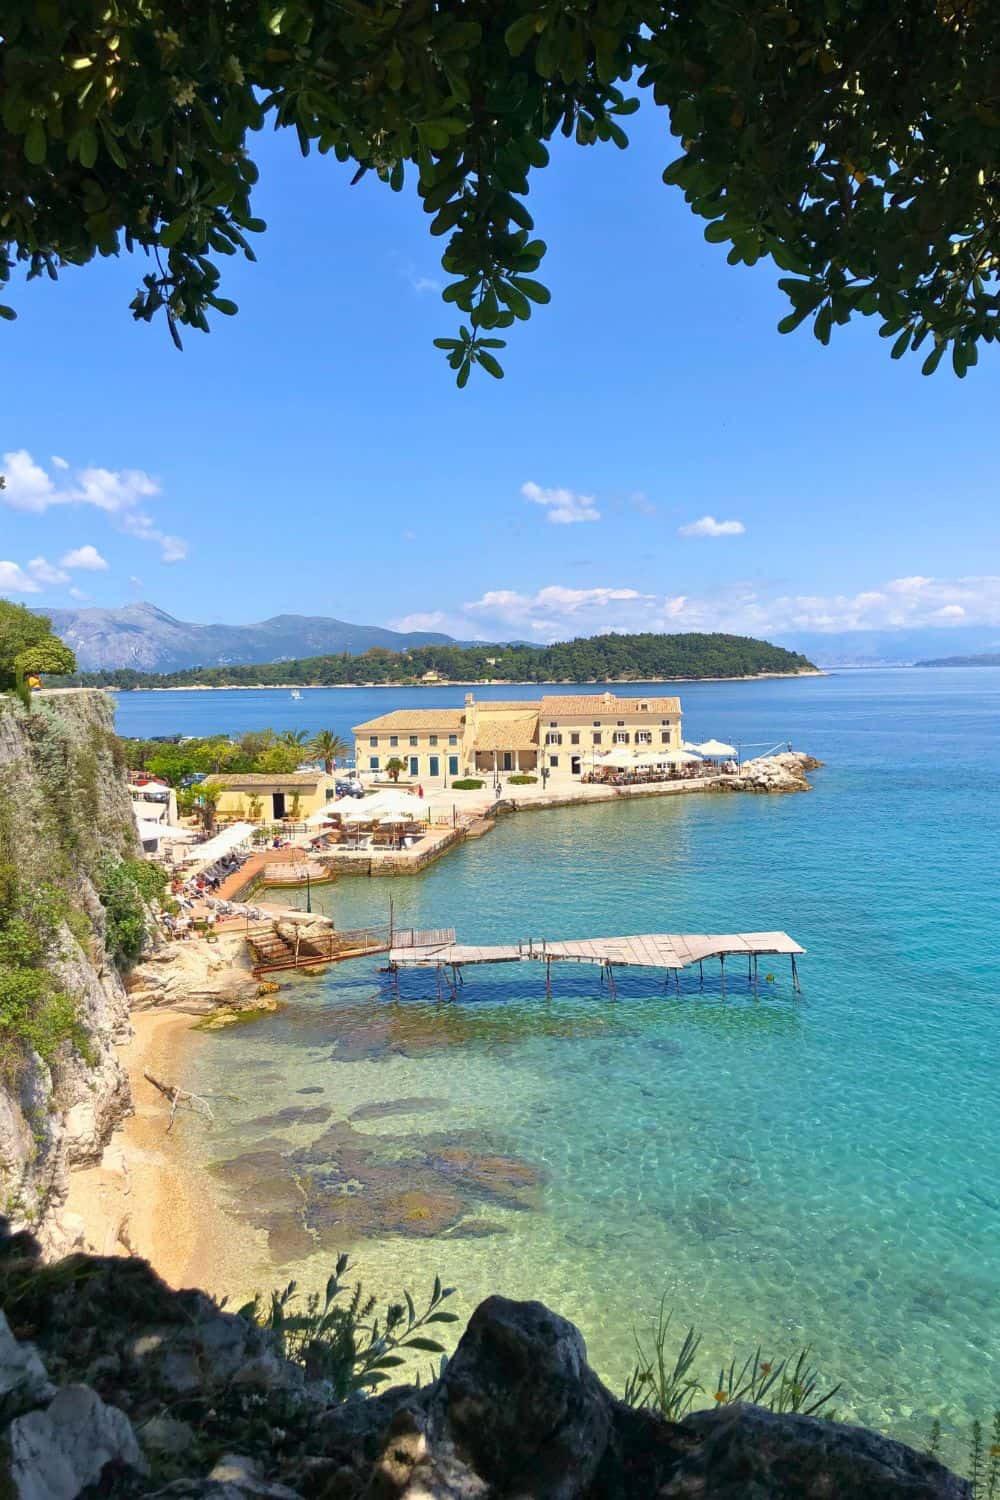 Colorful crystal blue water and large house in the background in Corfu, Greece.